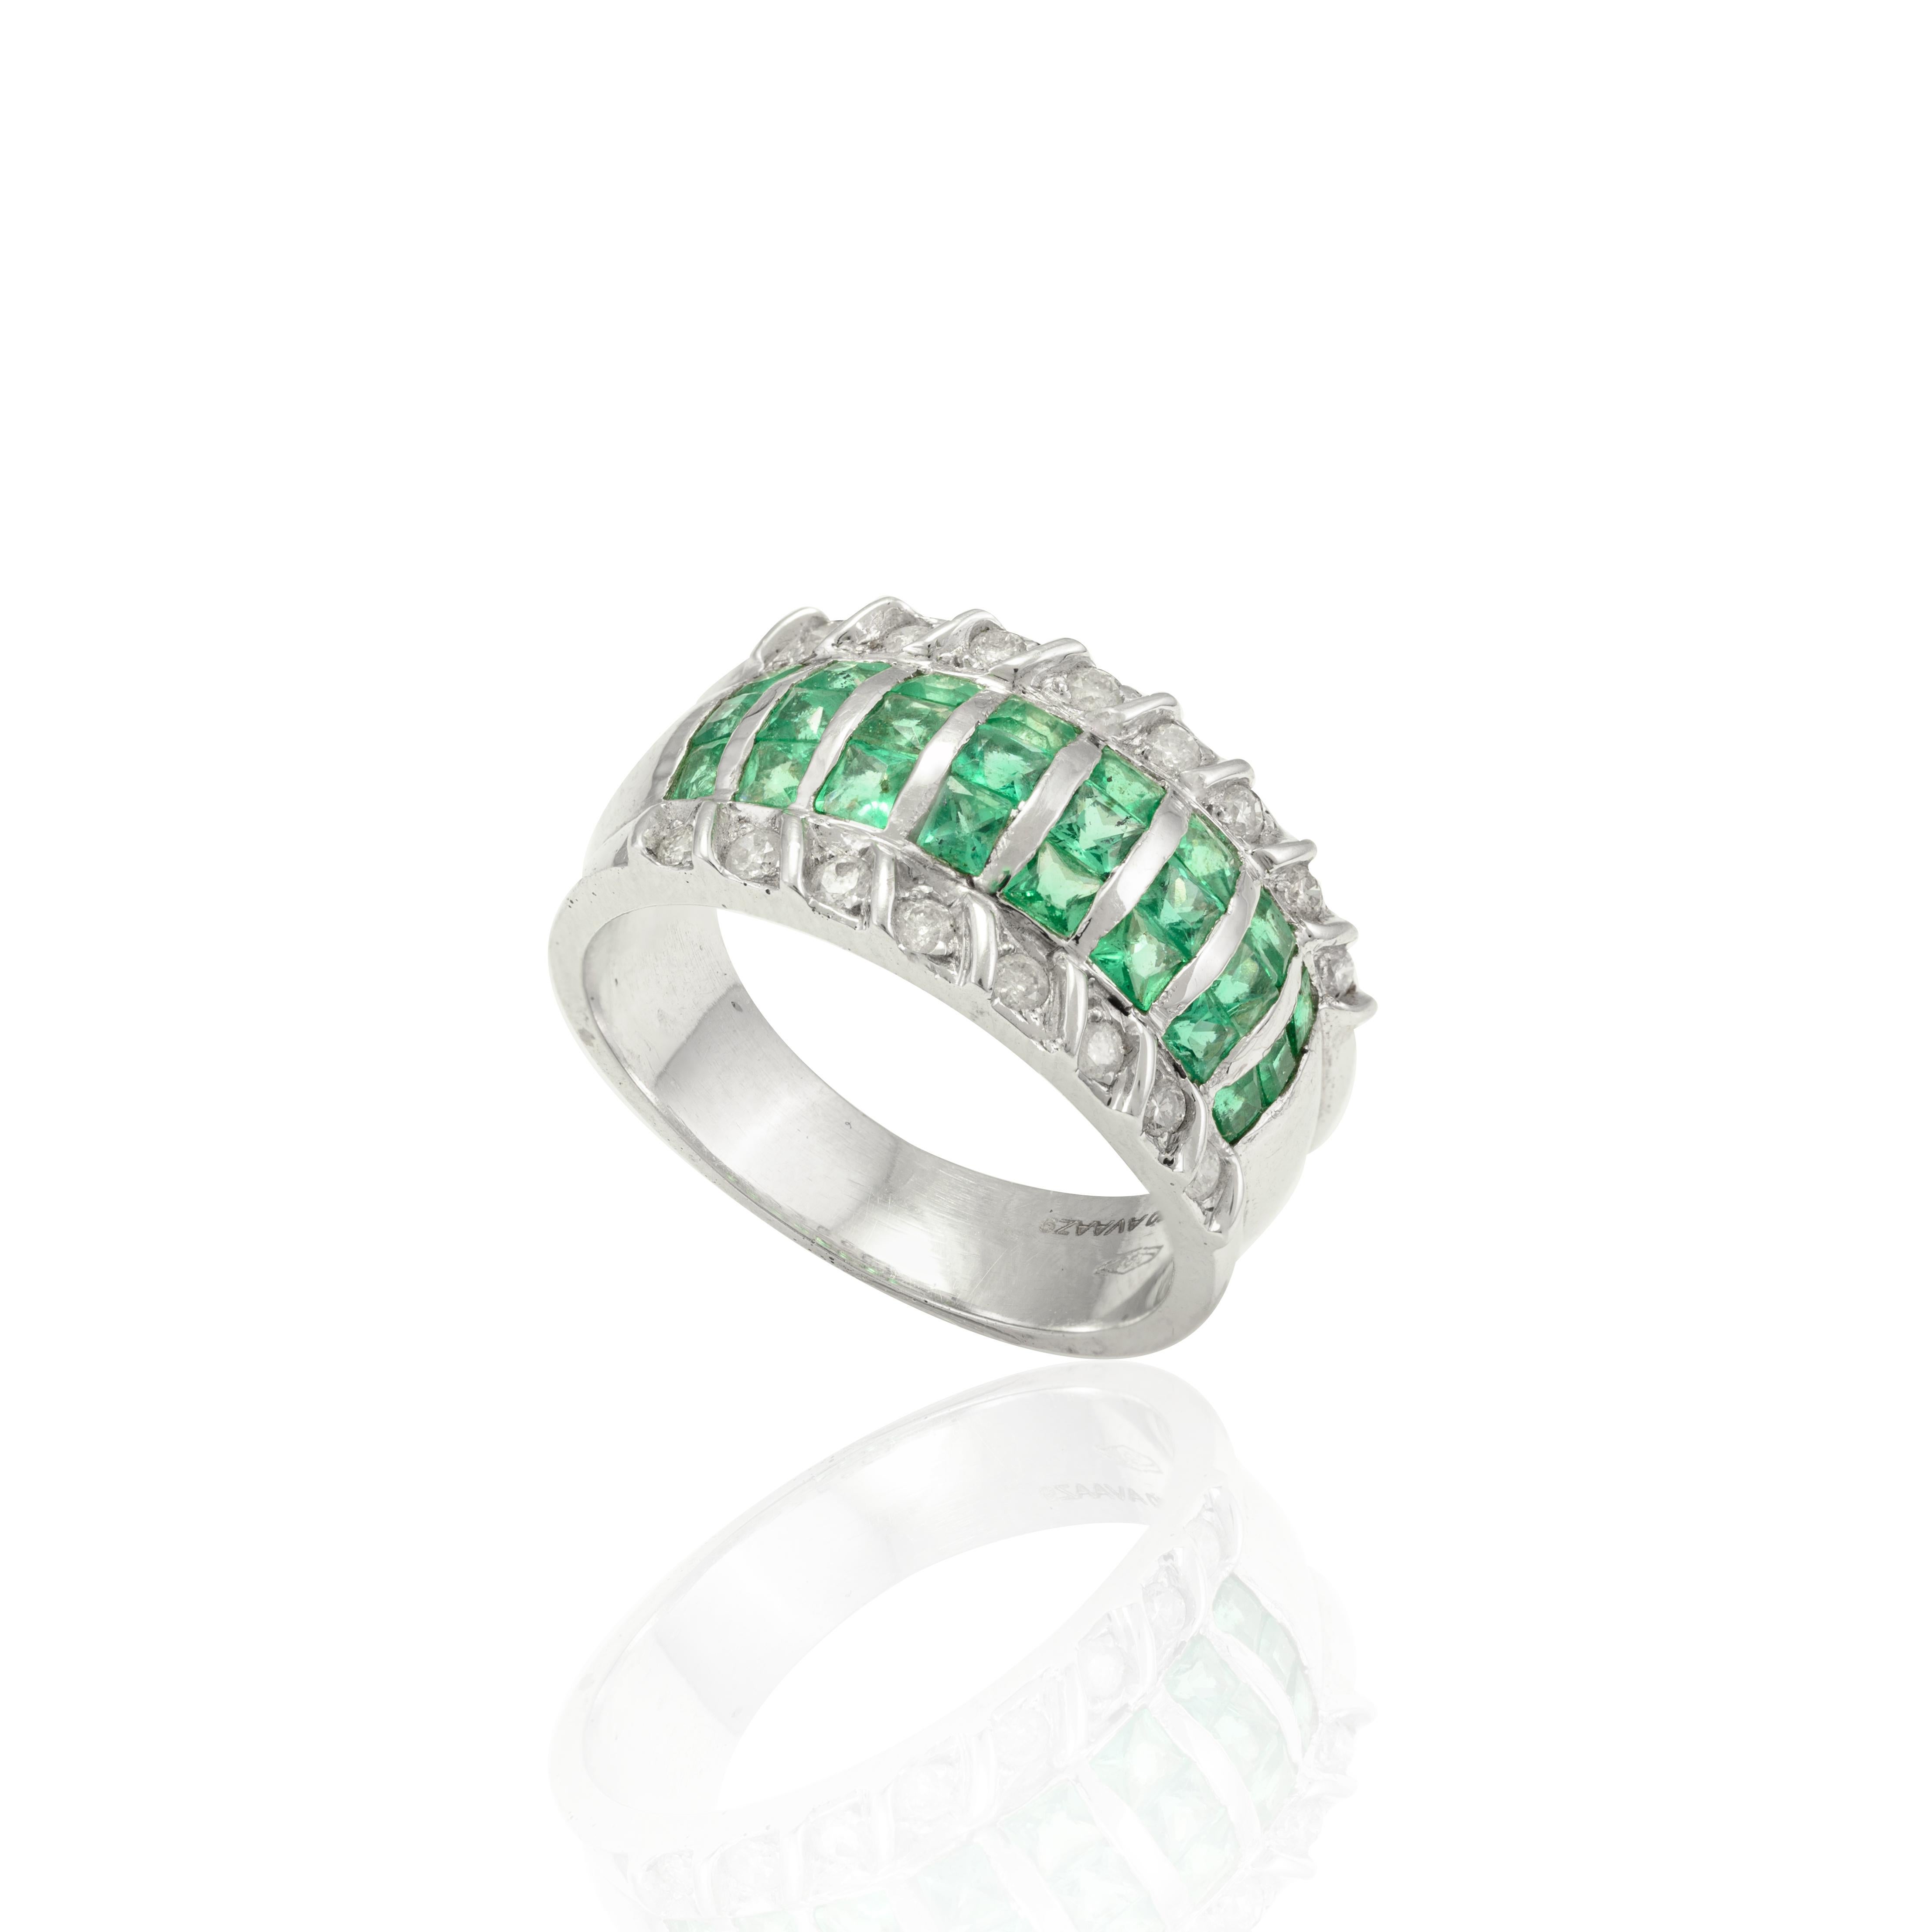 For Sale:  18k Solid White Gold 1 Carat Emerald and Diamond Wide Band Ring, Mens Jewelry 3